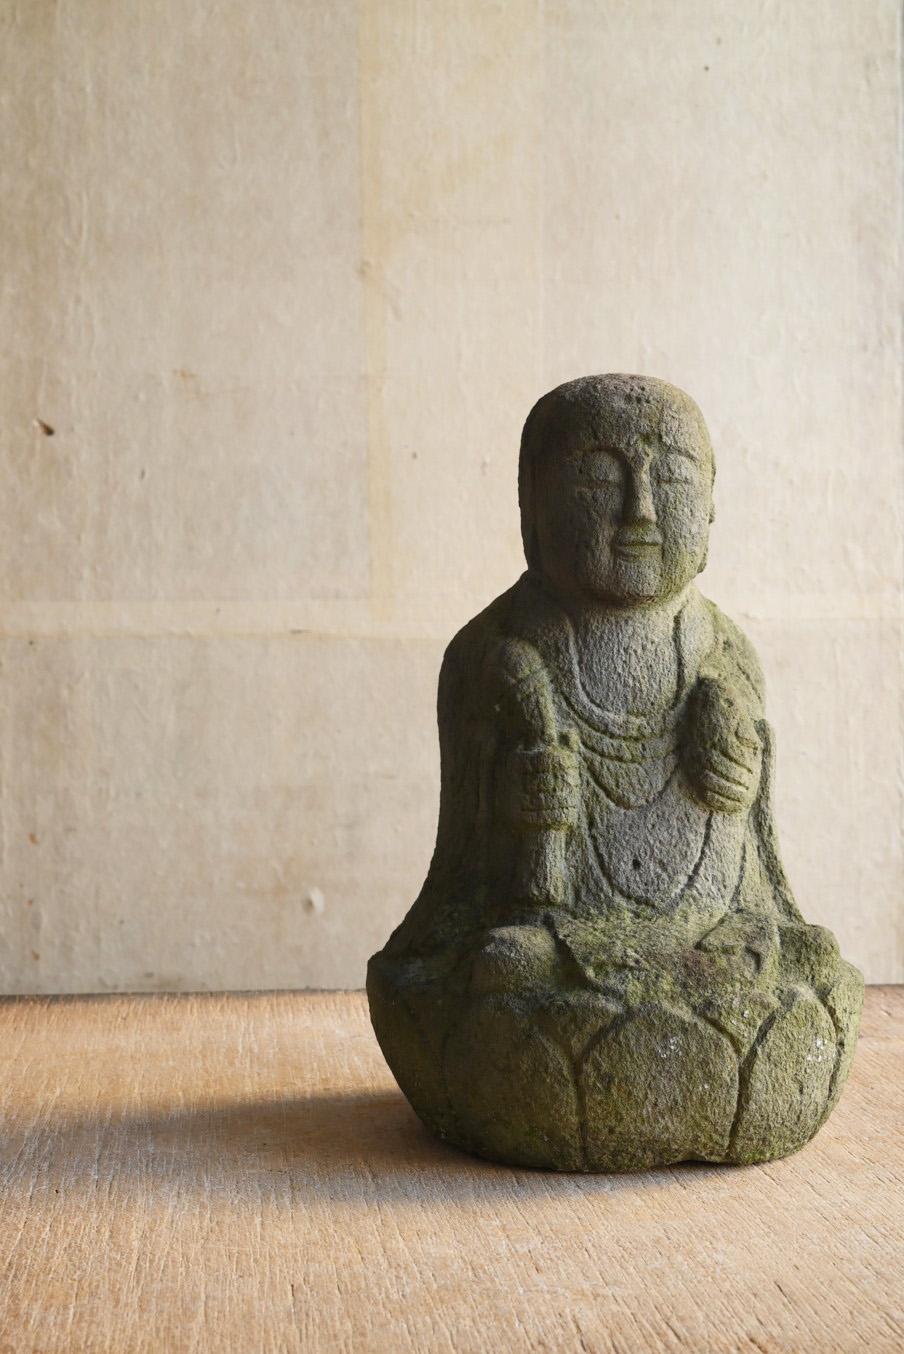 This is a stone Buddha from the Edo period (1750-1850) made of andesite.
It is Jizo Bodhisattva with a lotus flower (or a staff) in his right hand and a jewel in his left hand.
Jizo is one of the Bodhisattvas in the world of Buddhism.
It is a being